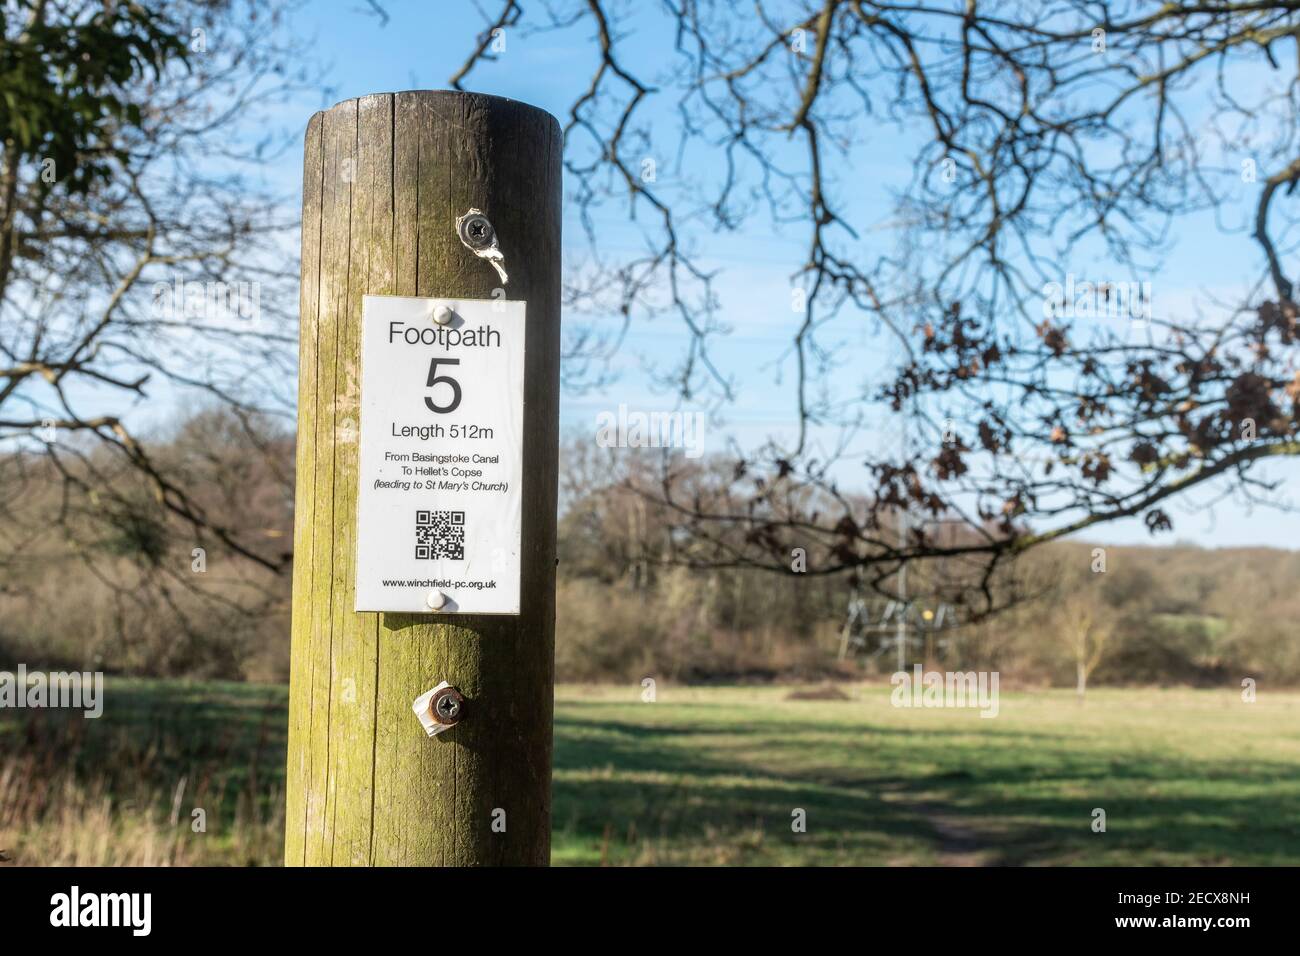 Country footpath walking route sign with a data matrix barcode or QR code, modern mobile phone technology, Winchfield, Hampshire, UK Stock Photo